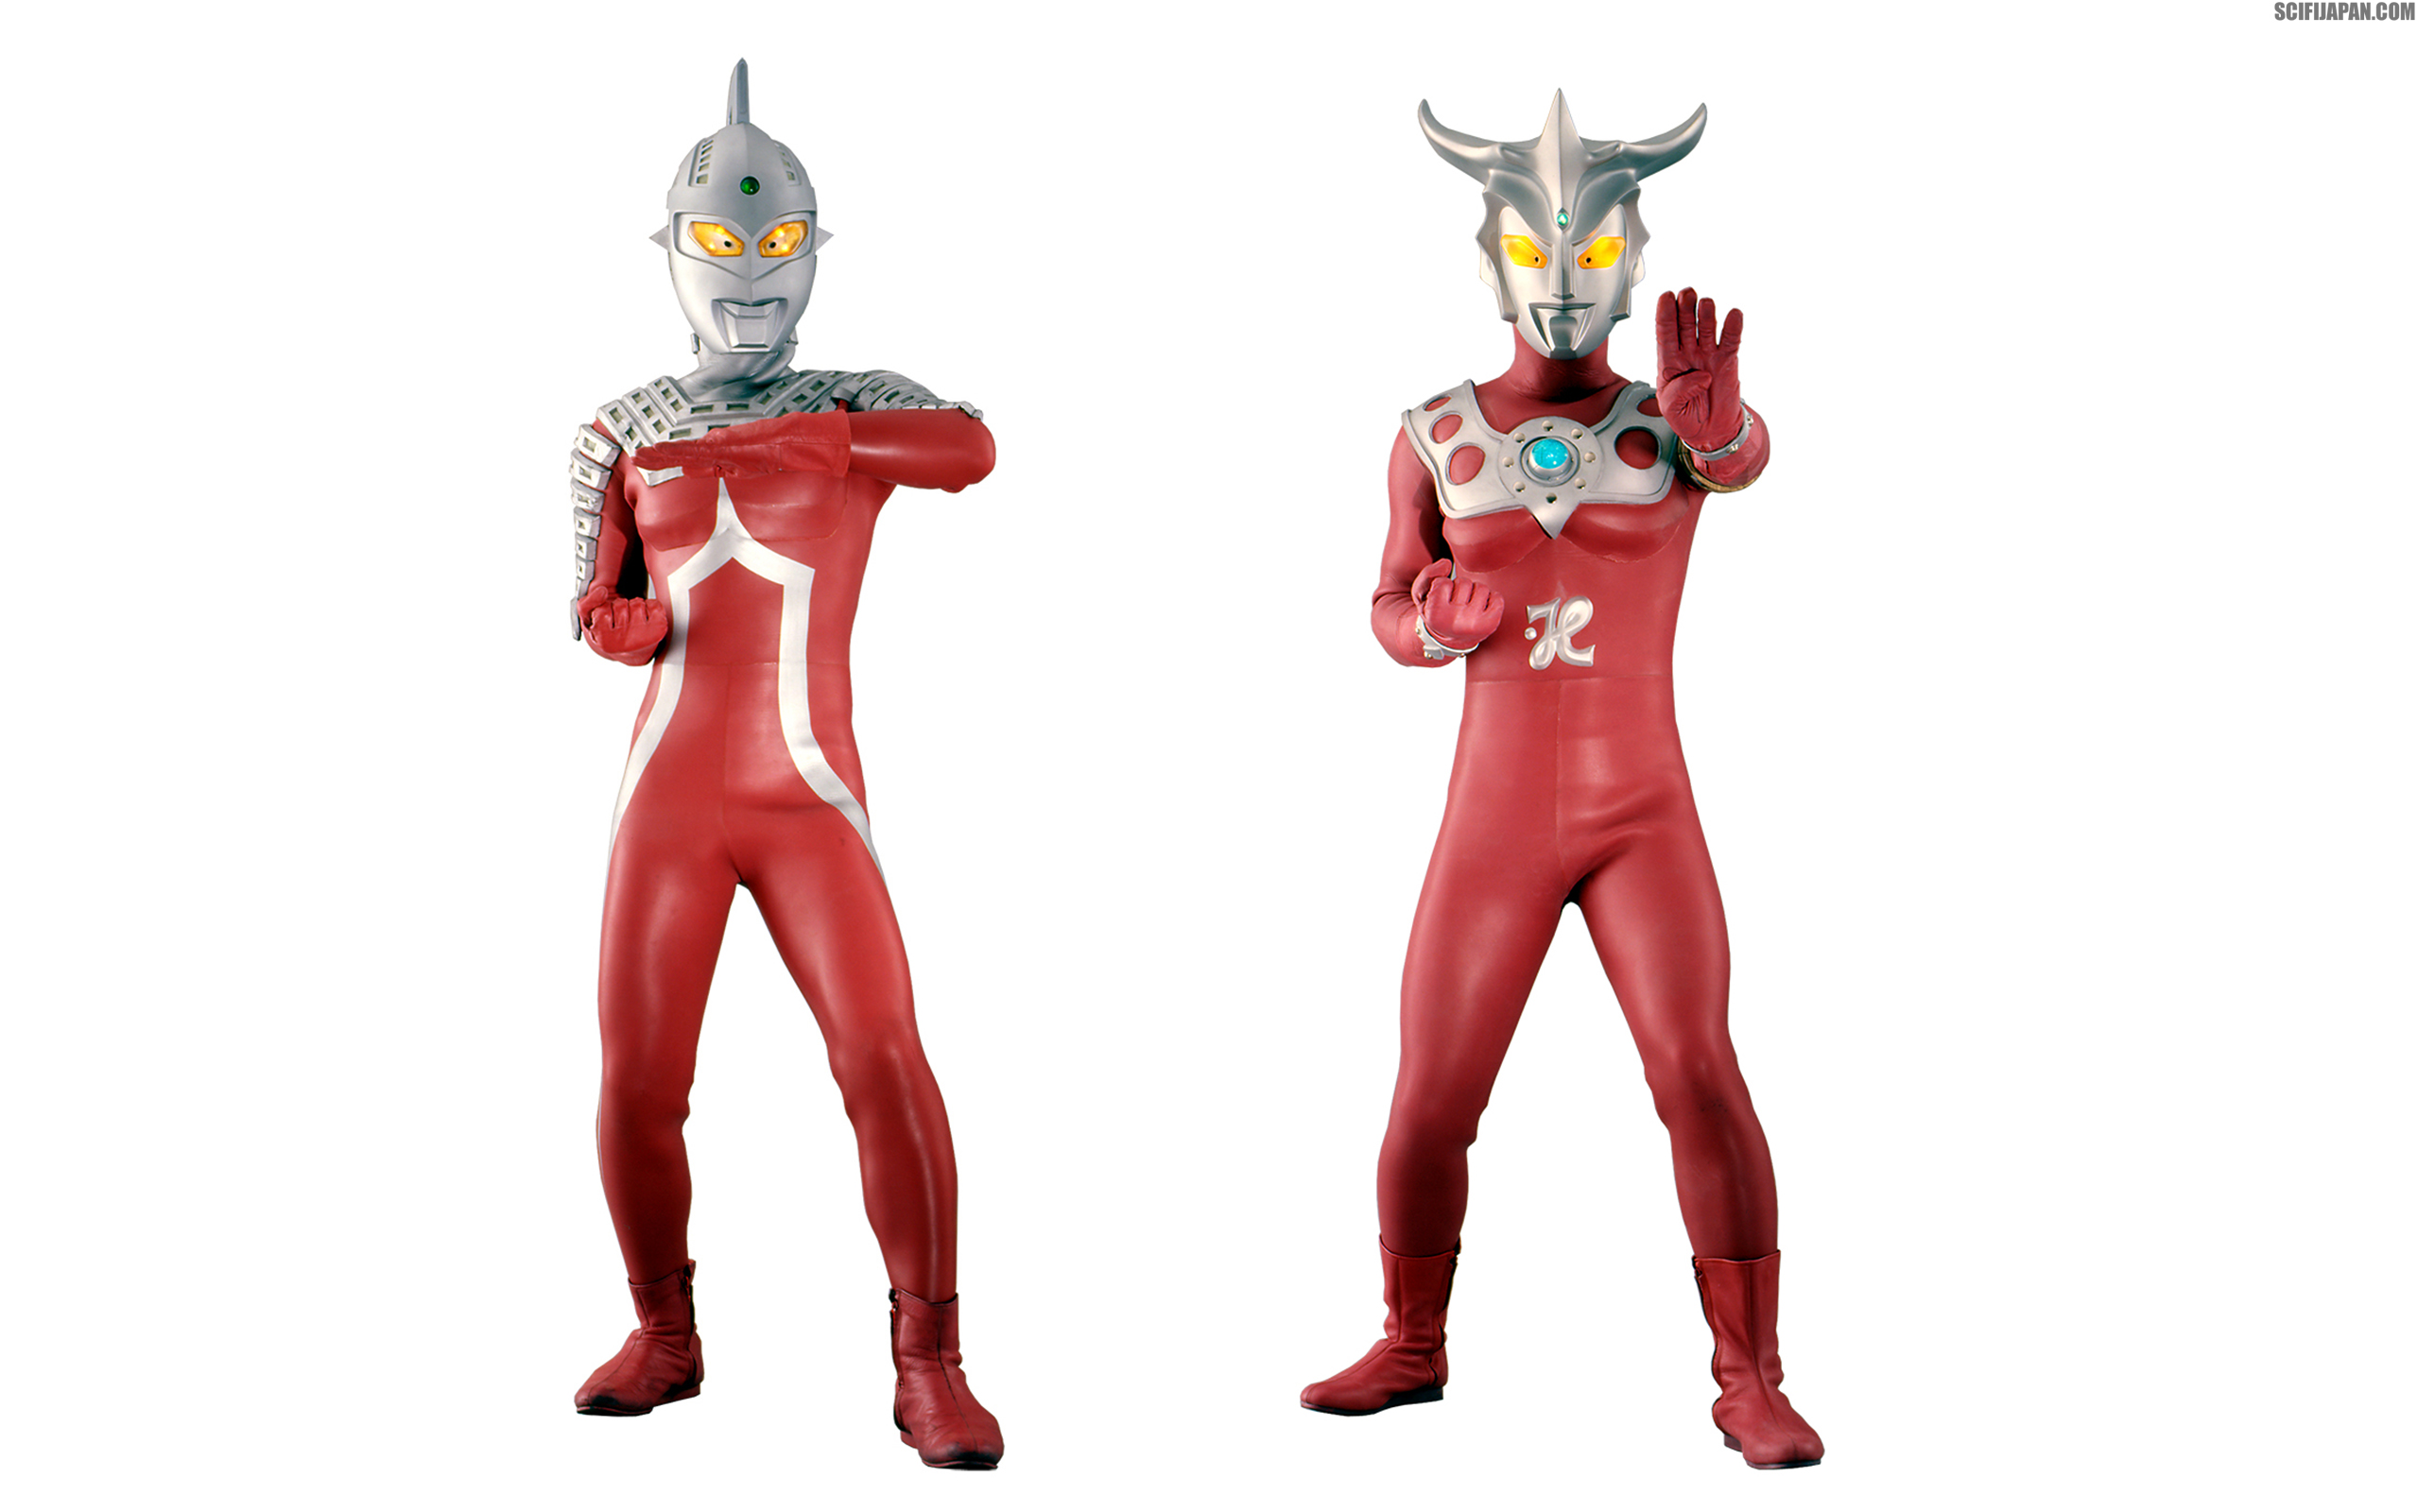 ULTRAMAN Z (ZETT) - Press Notes and Large Photo For New TV Series From Tsuburaya Pro